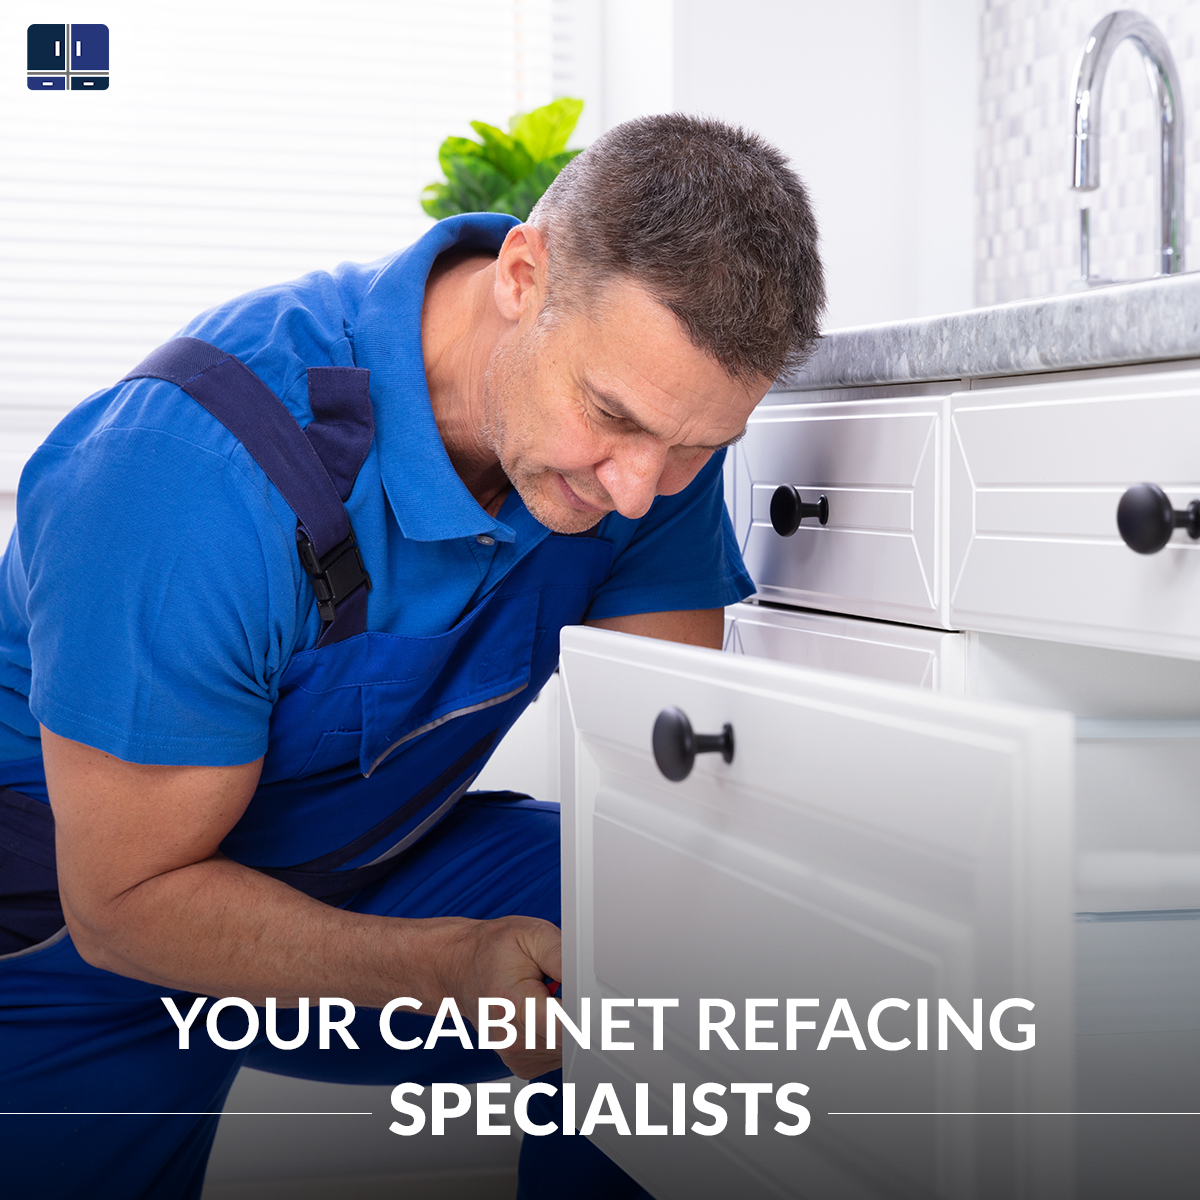 Your Cabinet Refacing Specialists